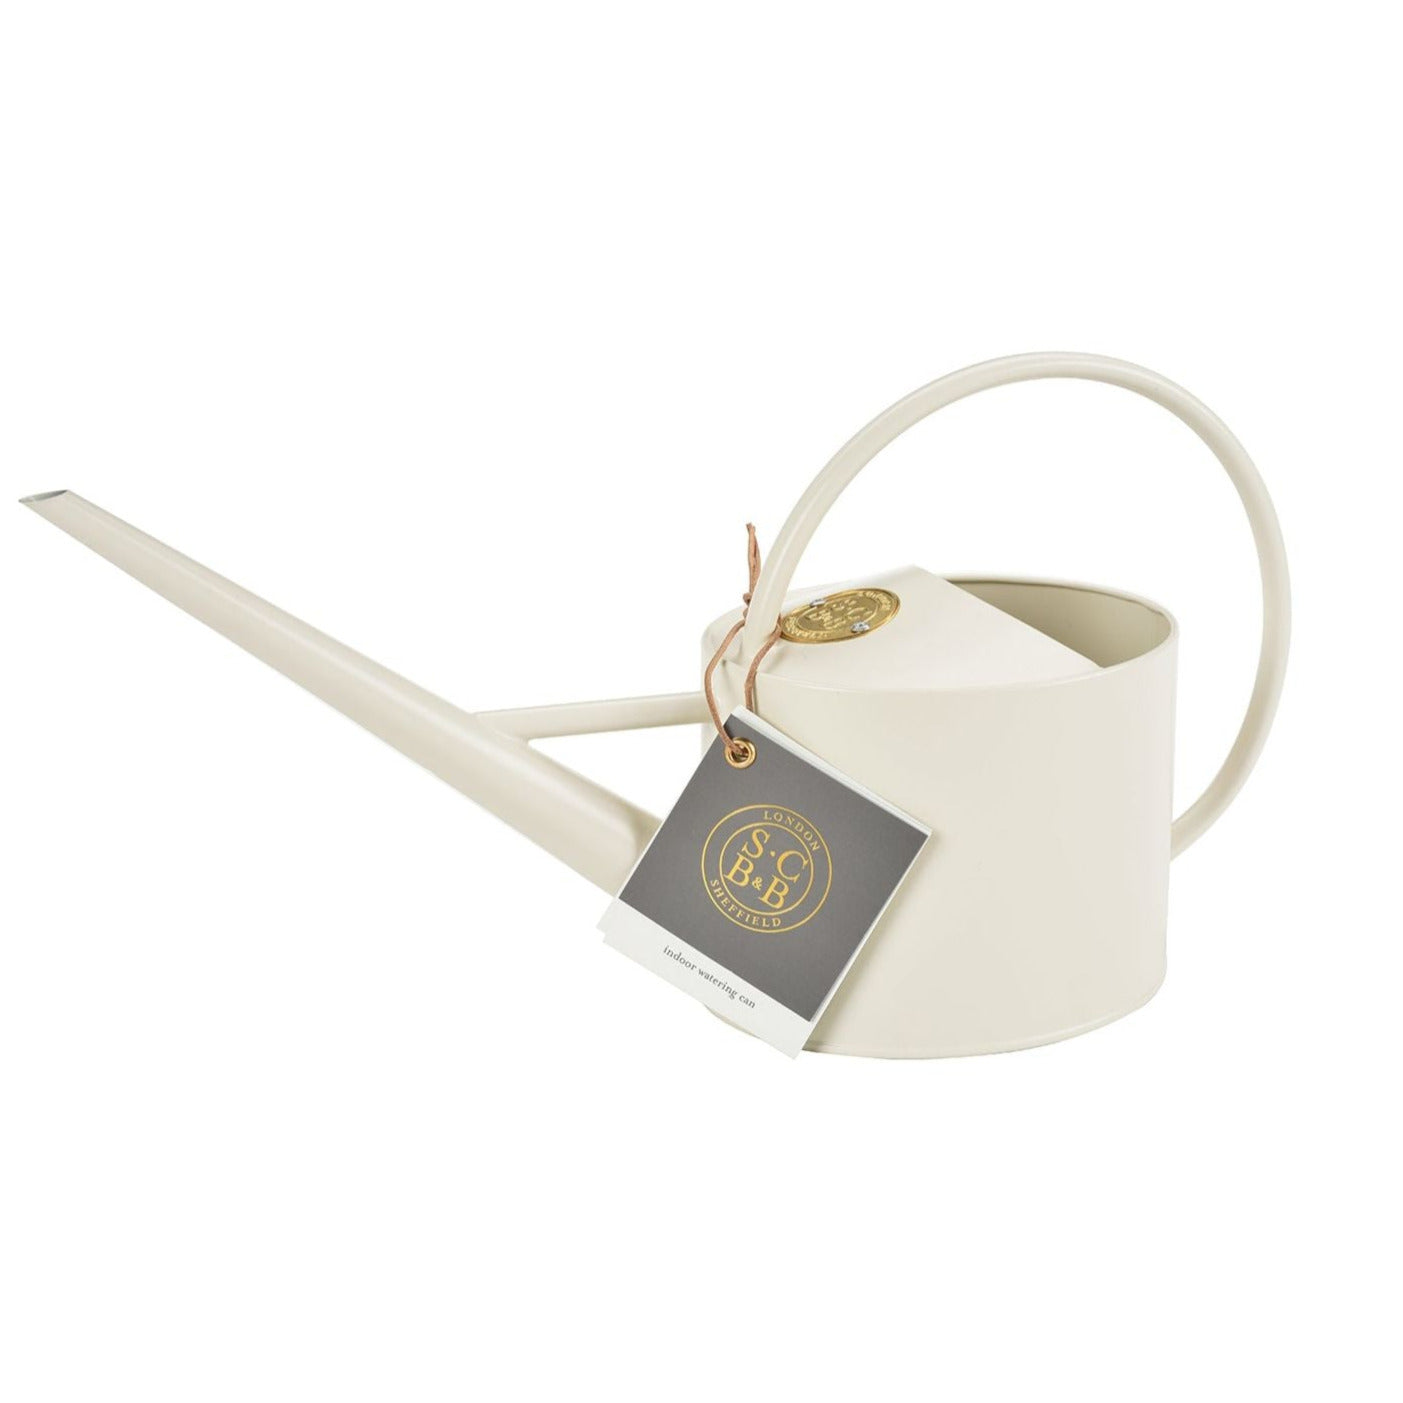 Sophie Conran for Burgon & Ball 1.7L Indoor Watering Can, Buttermilk